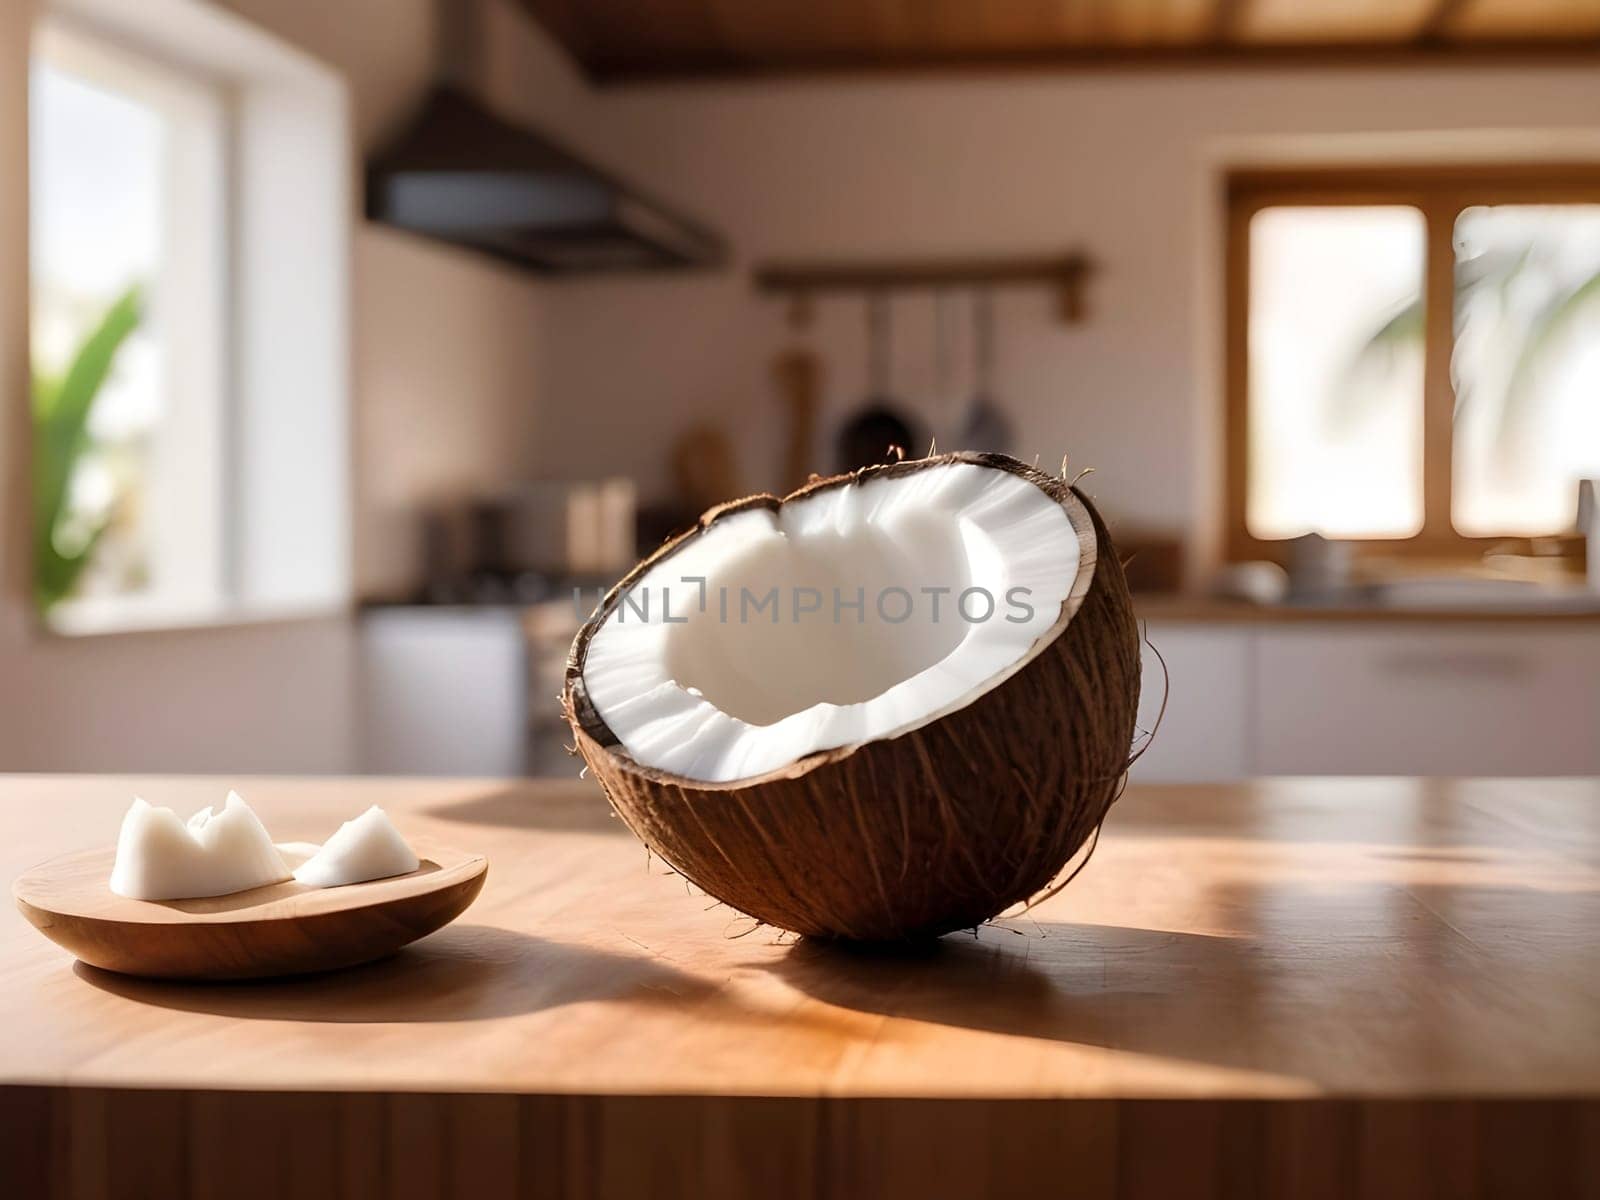 Coconut Serenity: Afternoon Glow on a Wooden Board in a Kitchen Setting by mailos